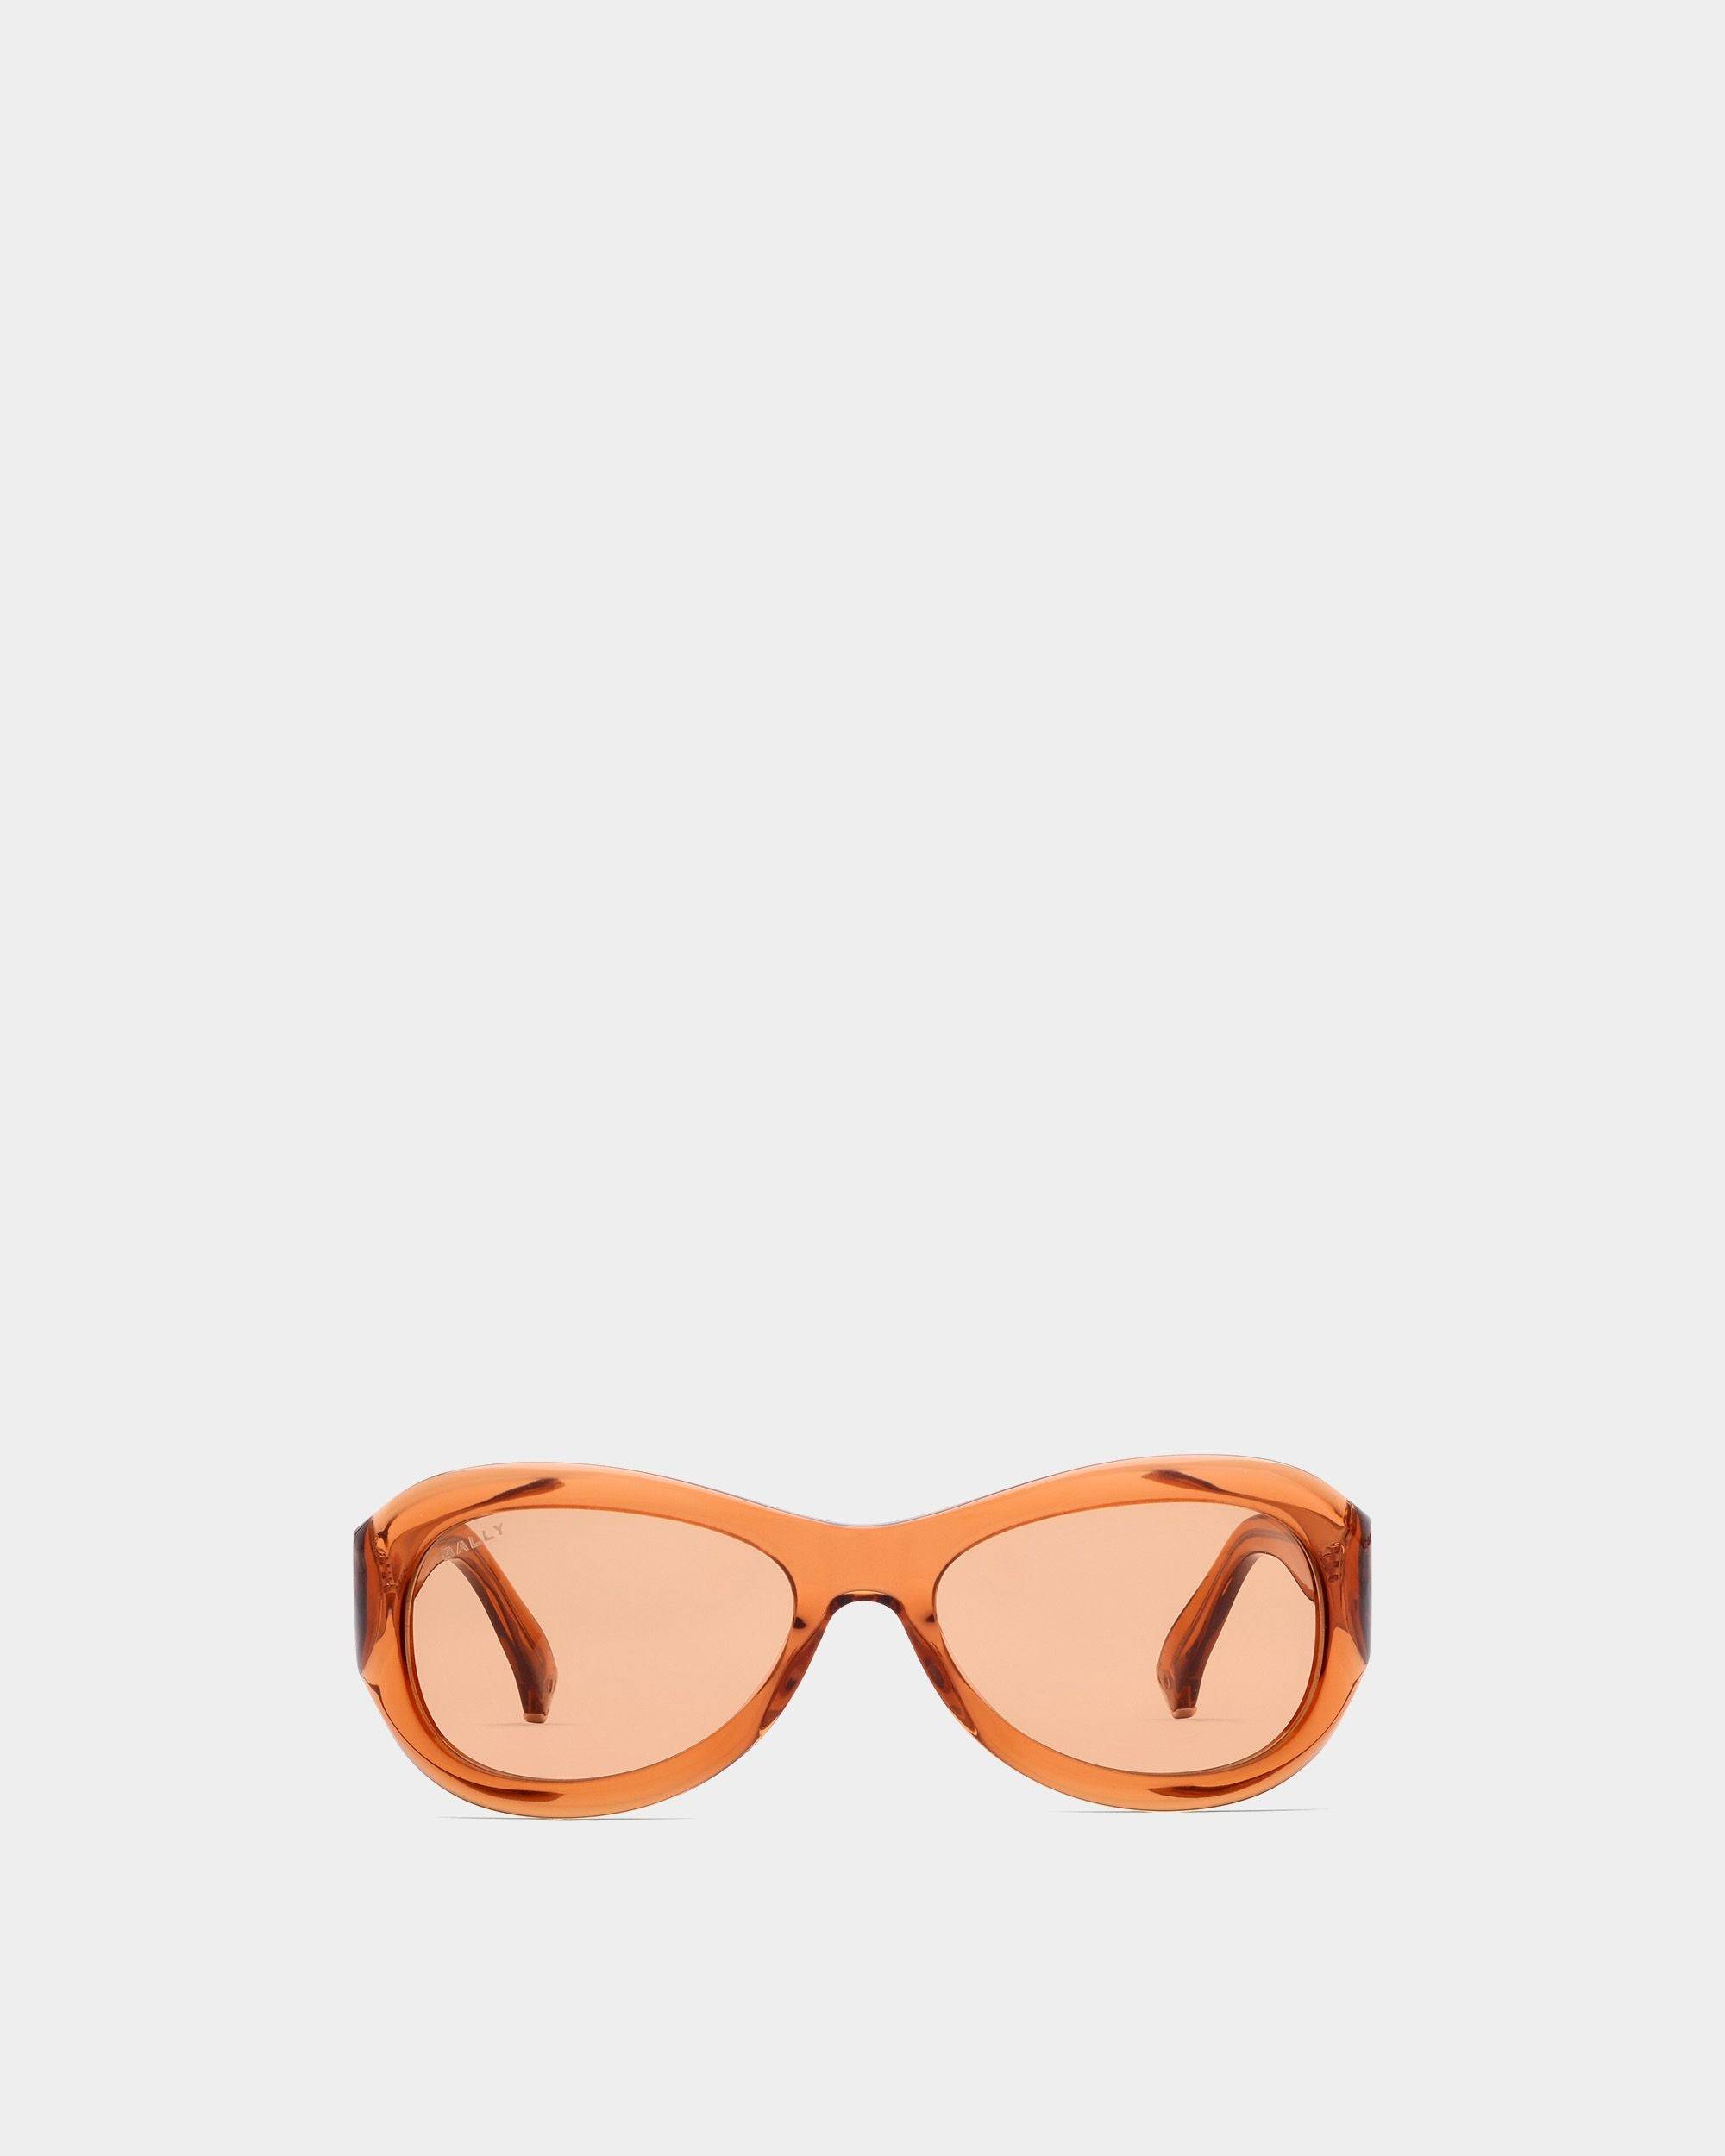 Maurice Acetate Sunglasses in Amber and Orange | Bally | Still Life Front